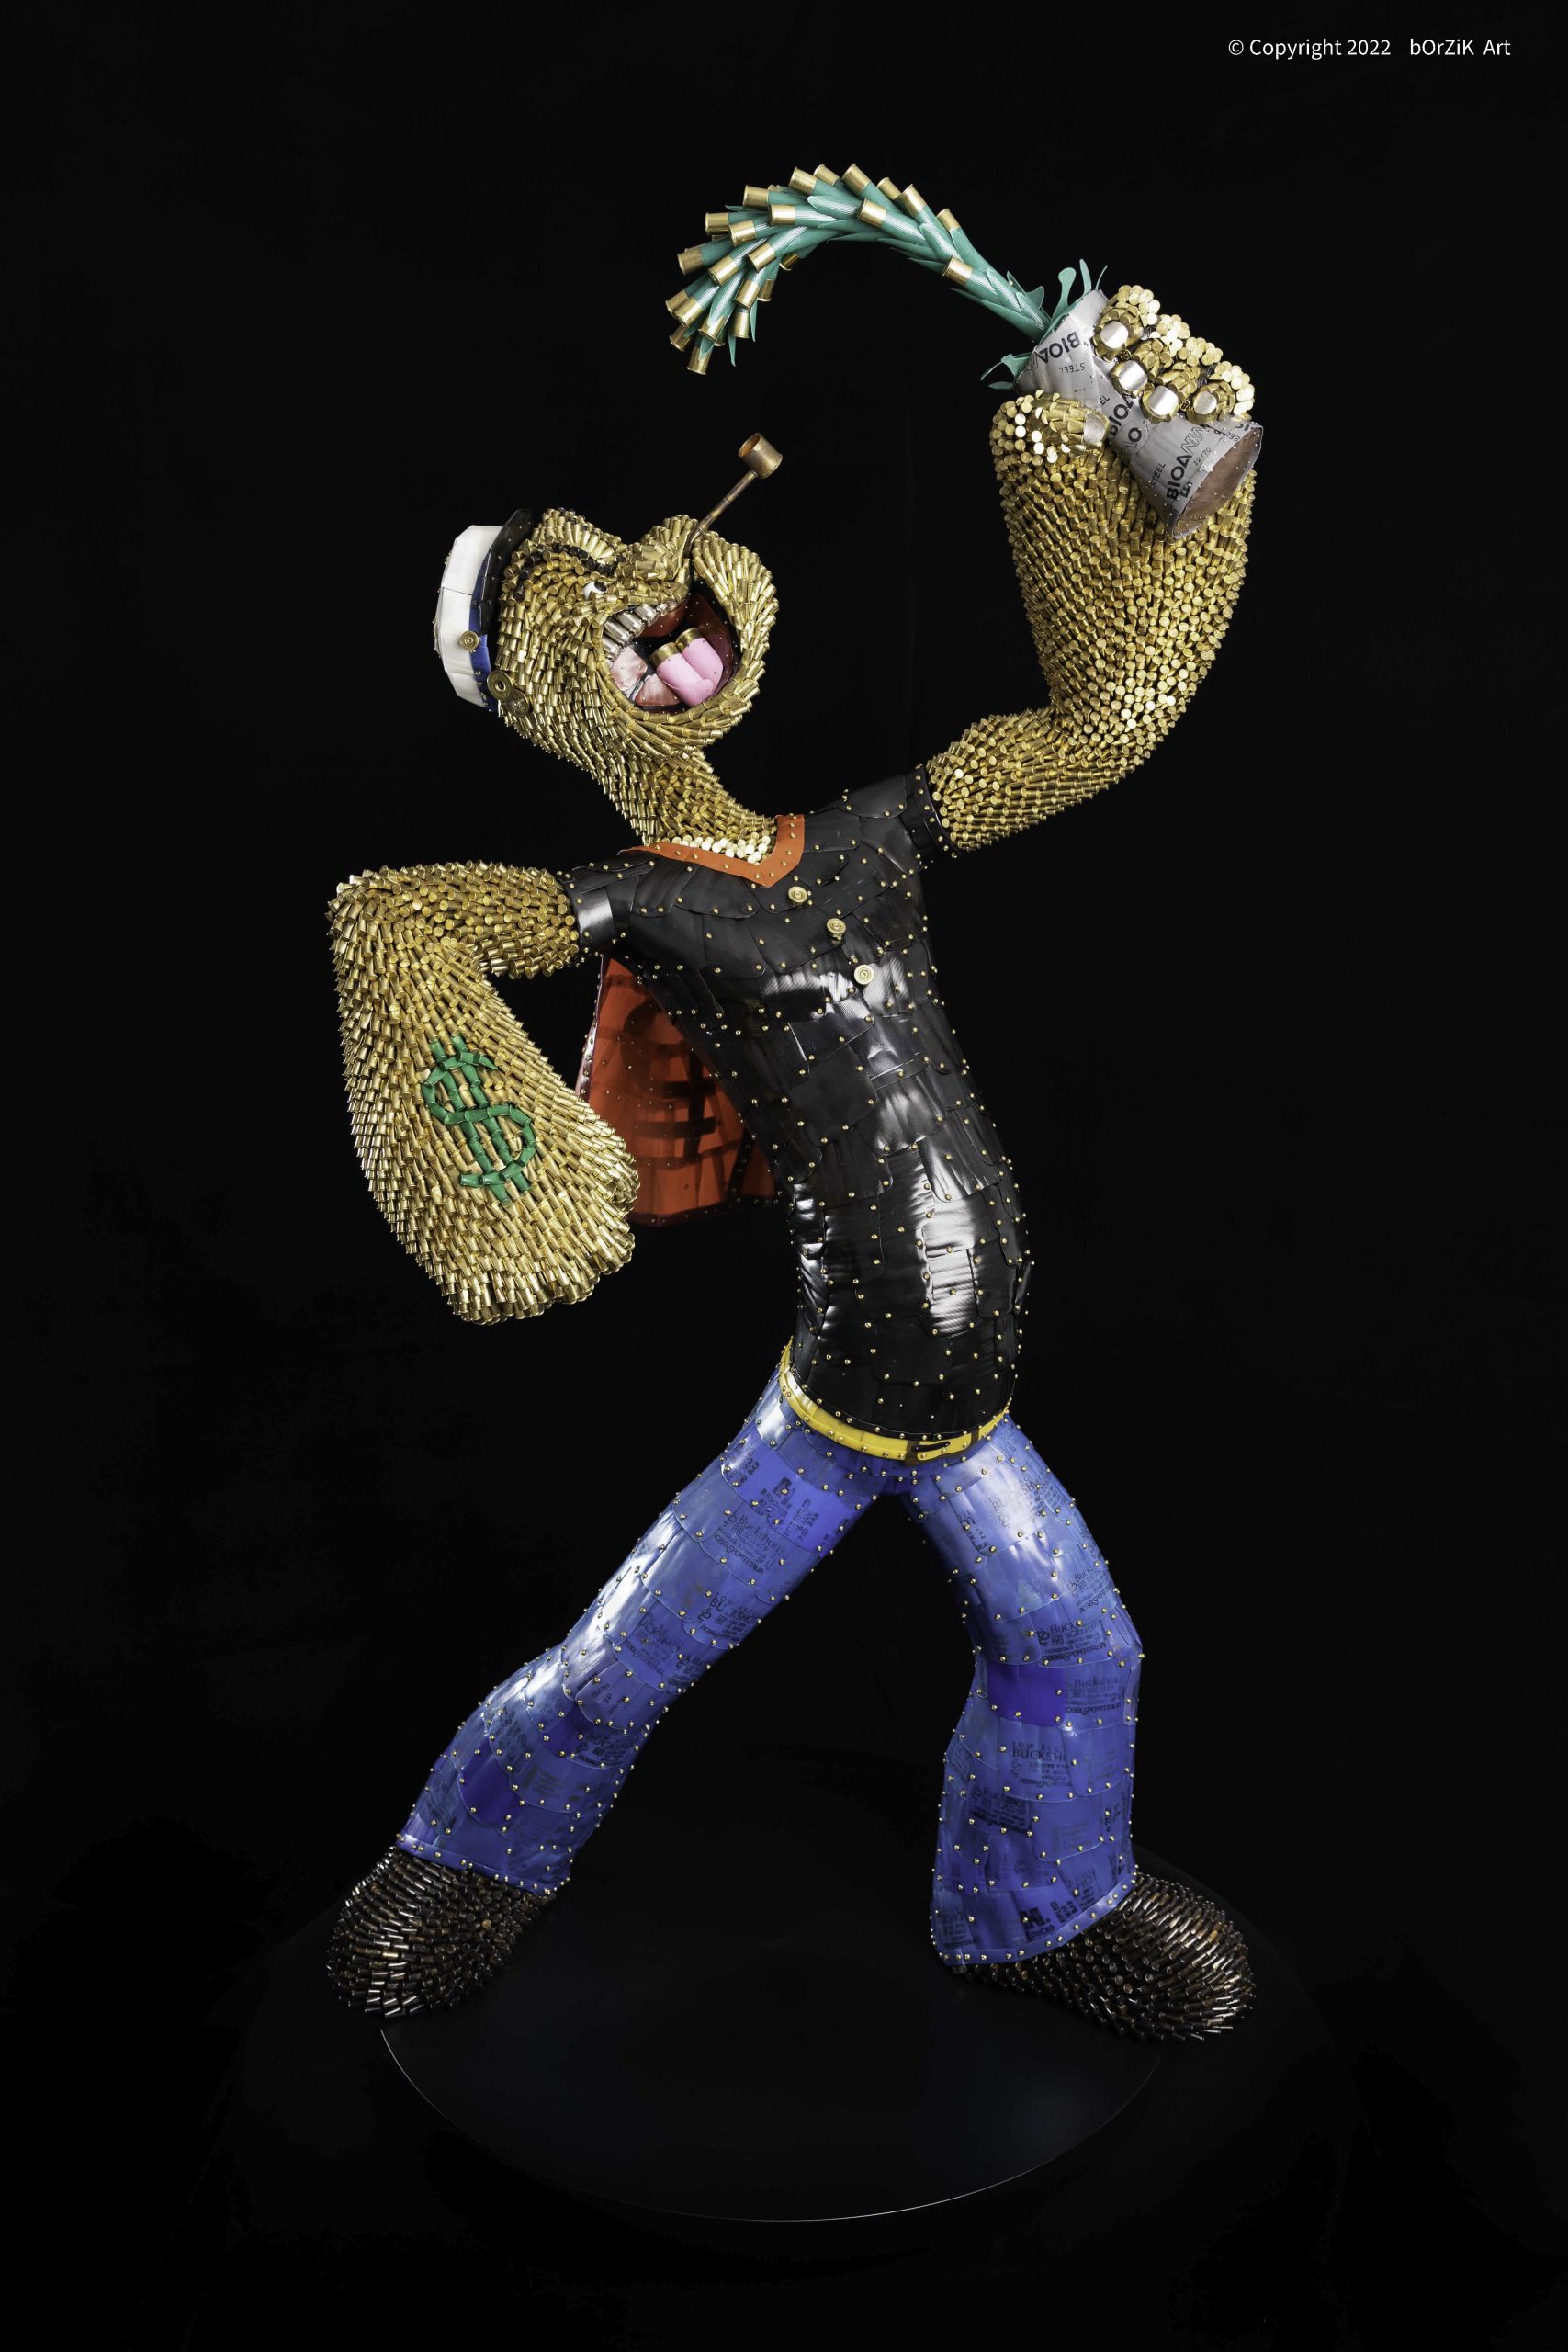 "Drunk on Power" is an intriguing sculpture that combines recycled bullet shells and the iconic character Popeye the Sailor Man. The use of bullet shells as the primary material challenges the conventional associations of violence and destruction with these objects, transforming them into a medium for artistic expression and social commentary.